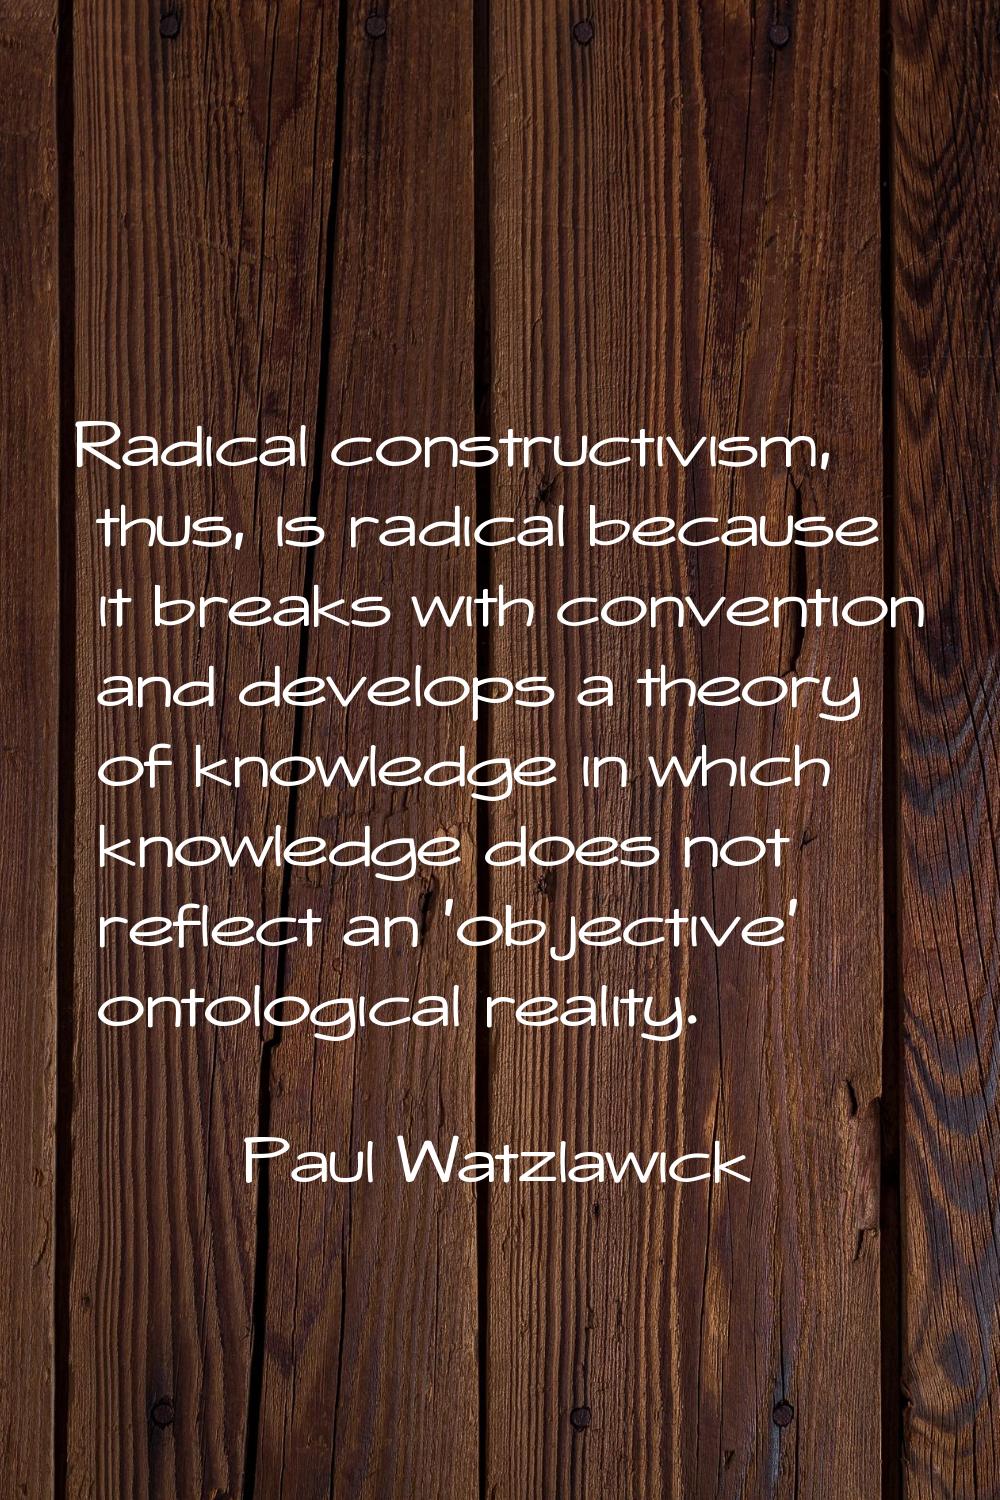 Radical constructivism, thus, is radical because it breaks with convention and develops a theory of